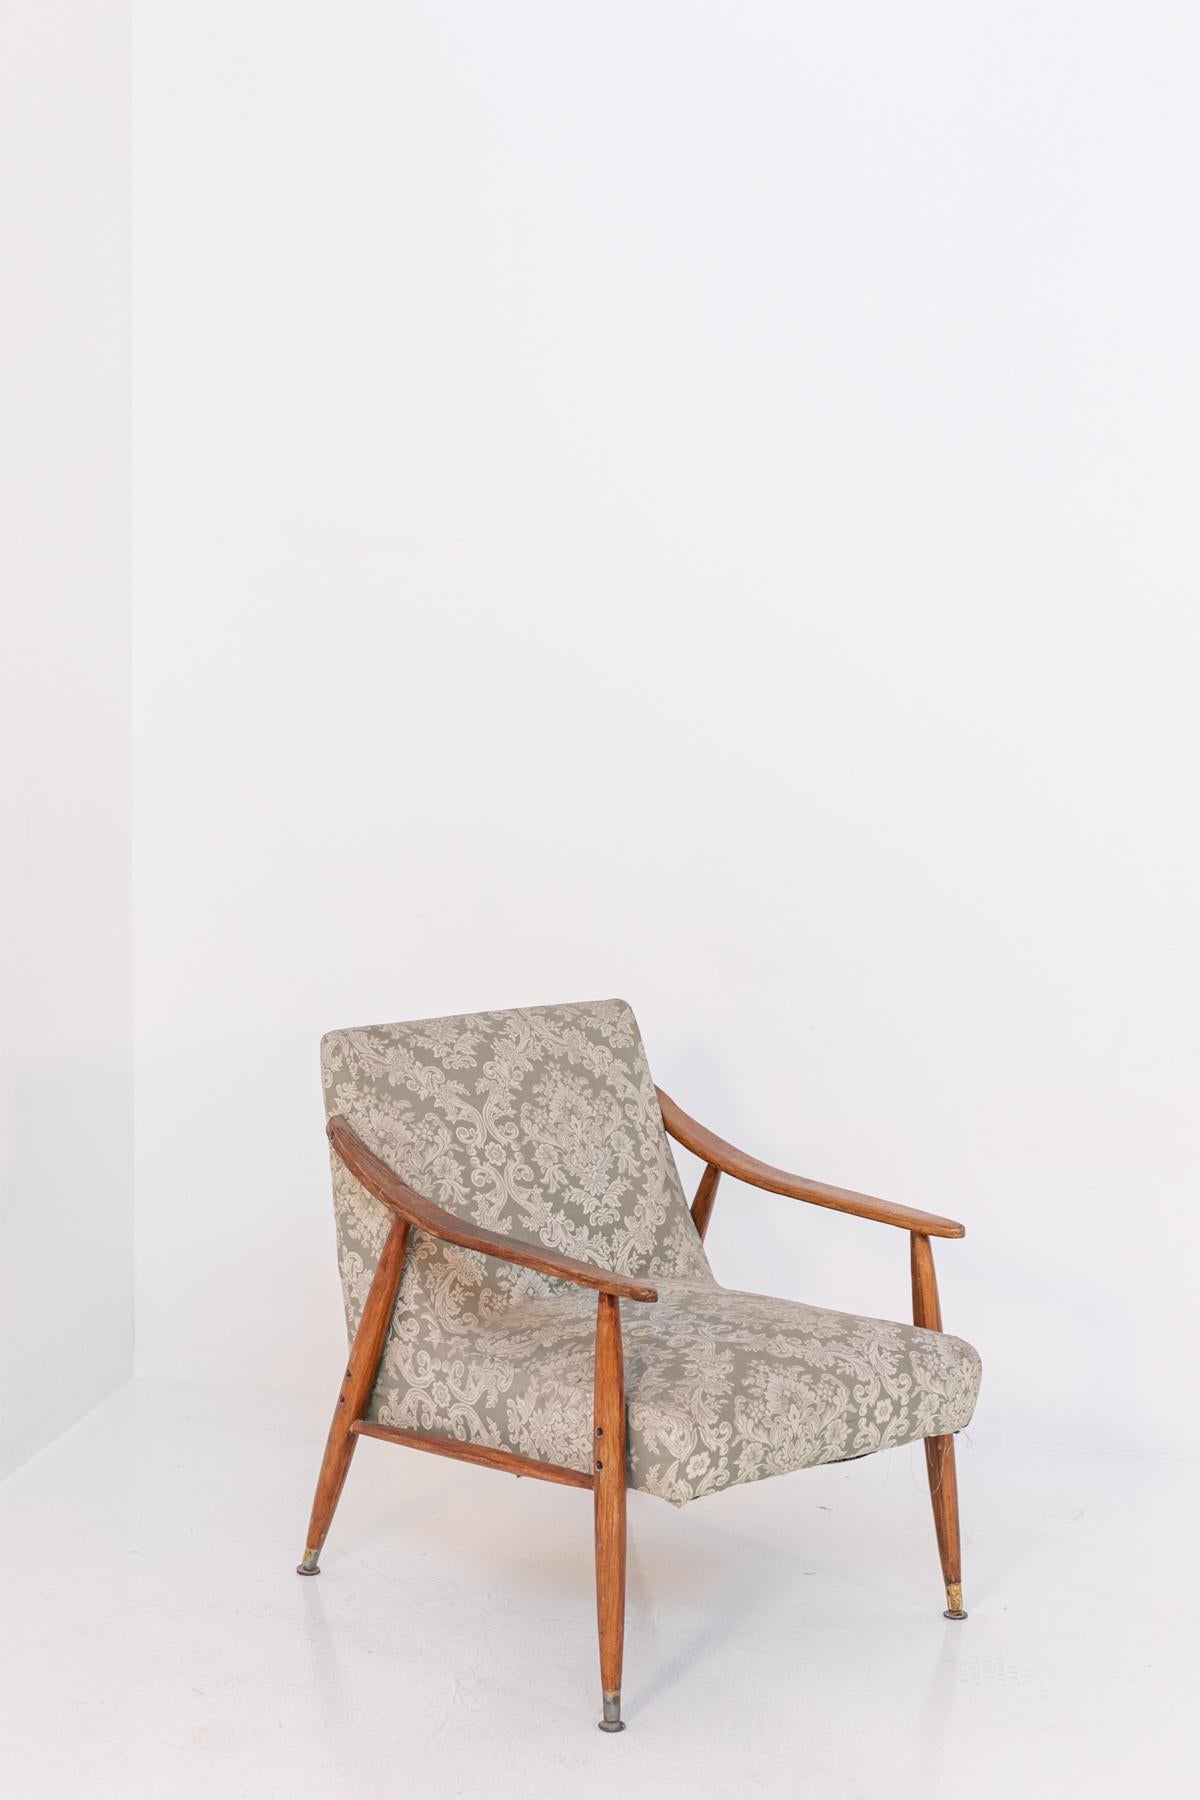 Nordic Armchair in Wood and Damask Fabric For Sale 3